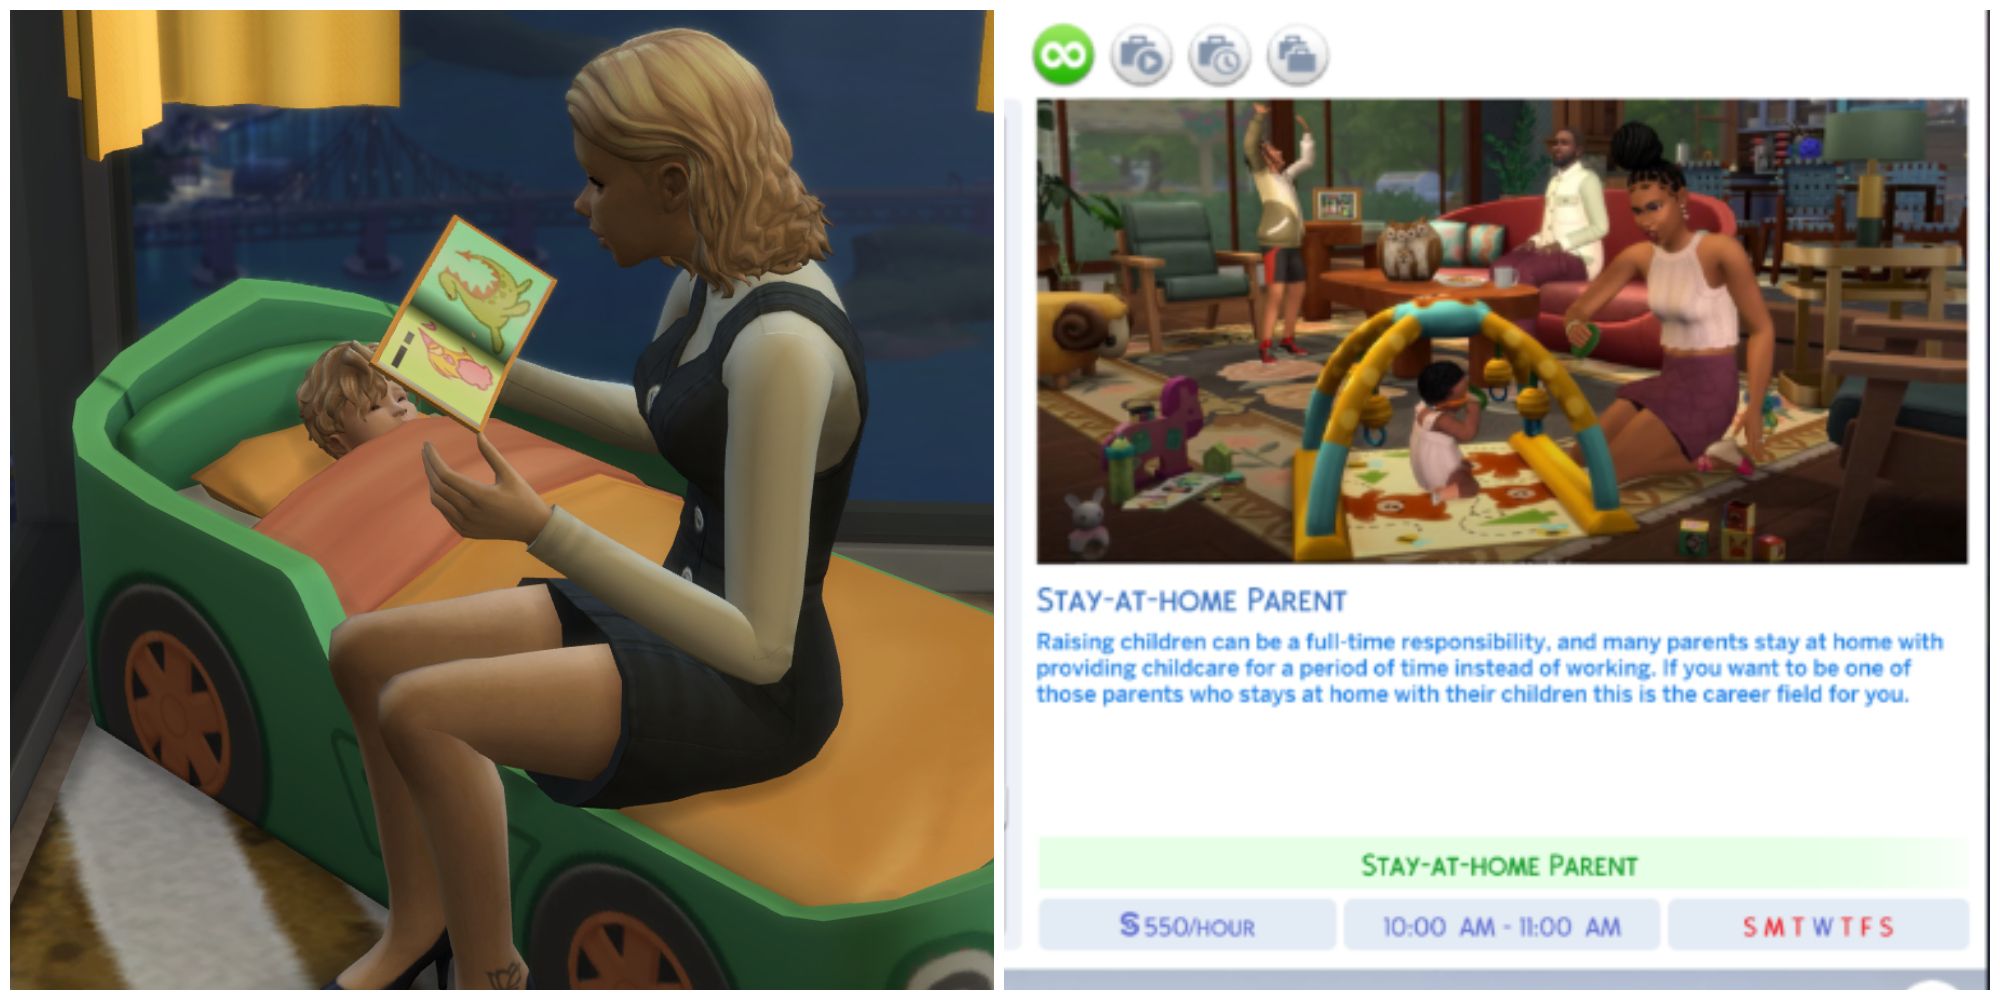 With the Stay At Home Parent Career mod, Sims can get paid to raise their children for their source of income